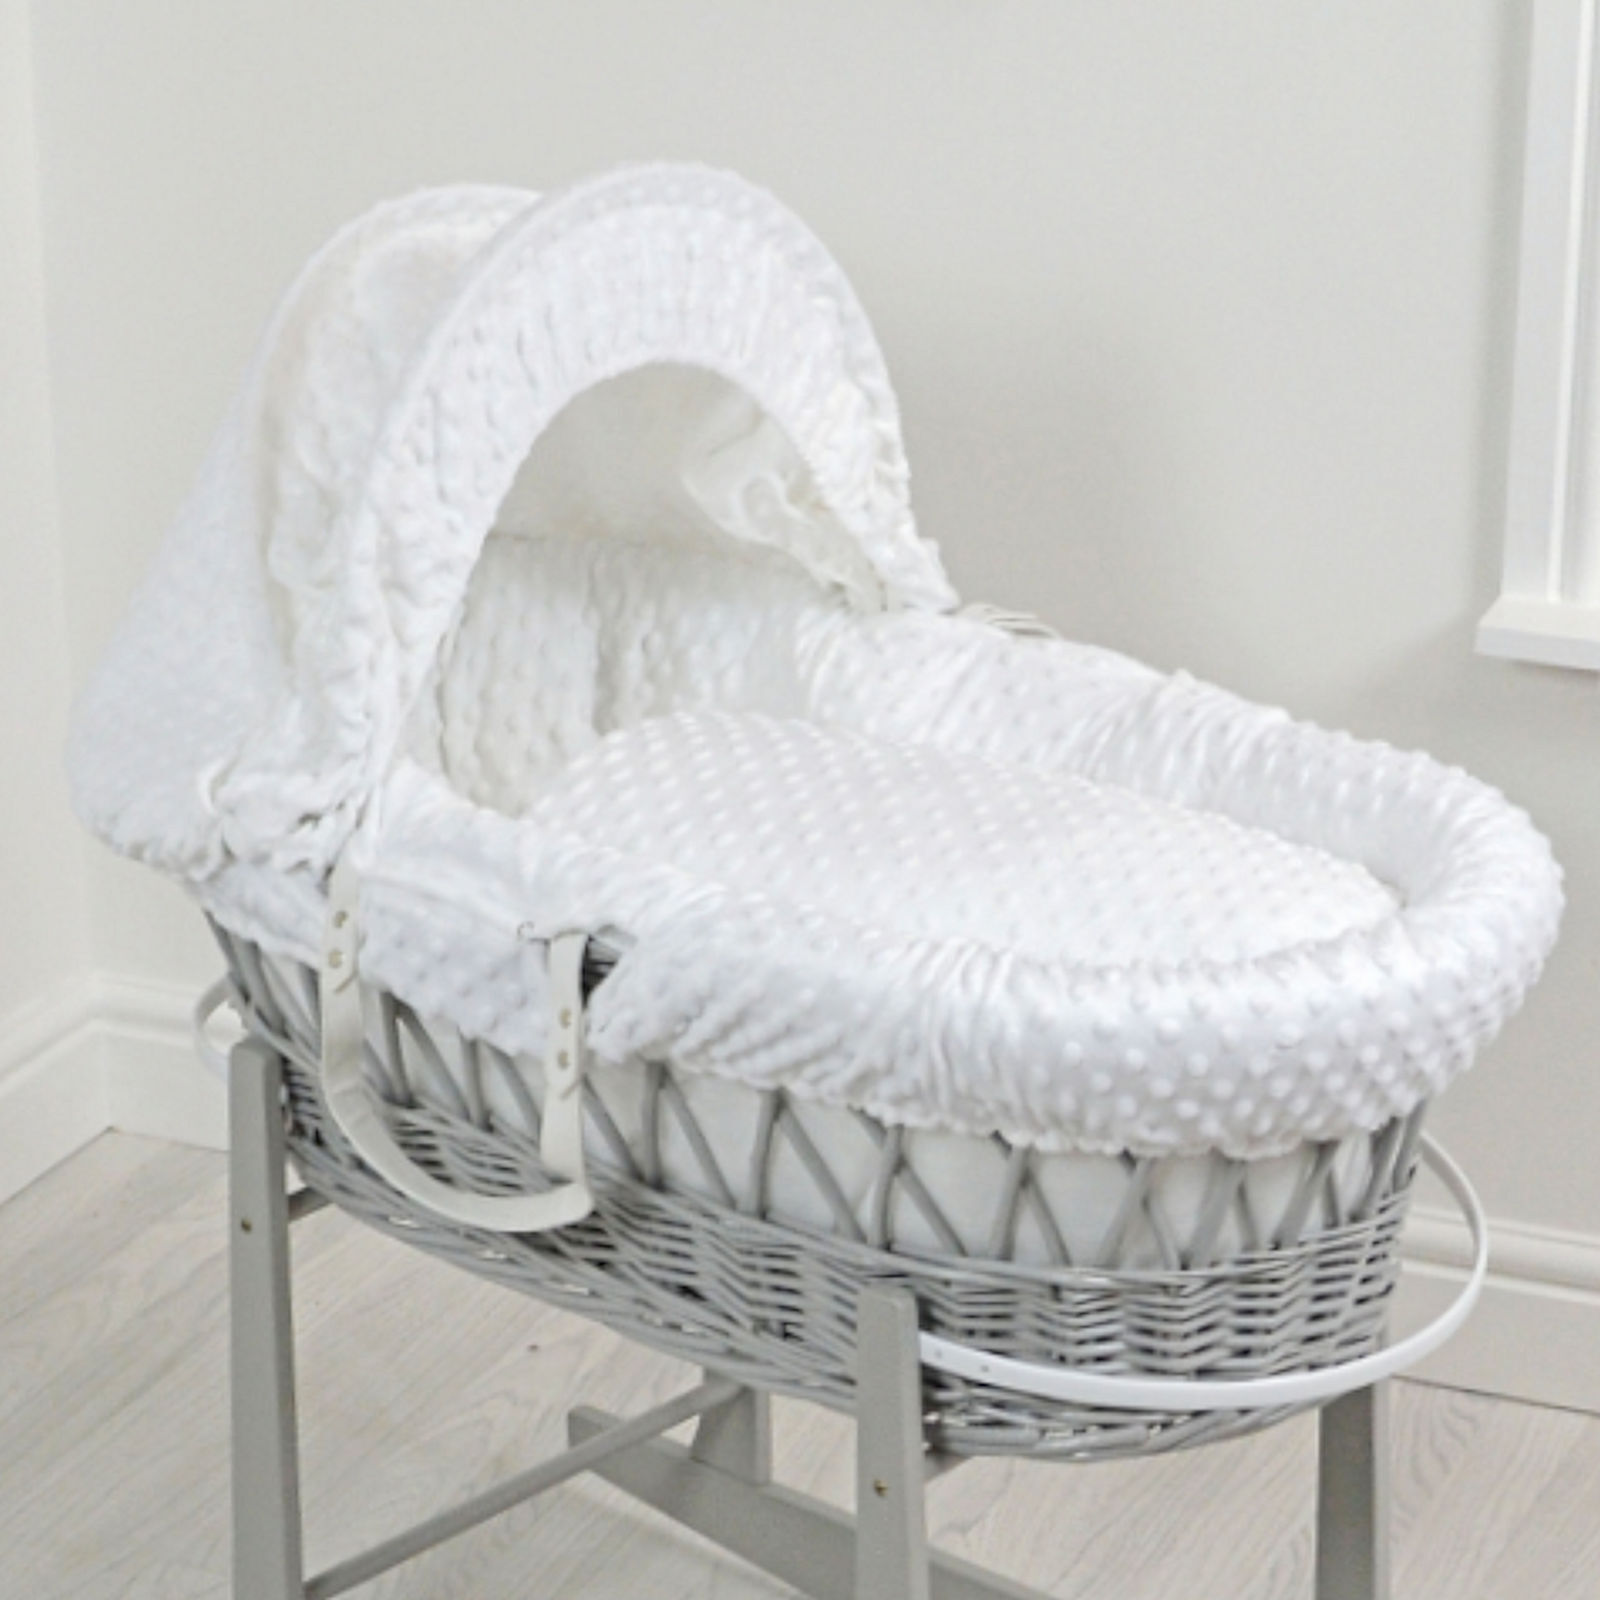 4 baby 4baby Deluxe Padded Grey Wicker Moses Basket - White Dimple